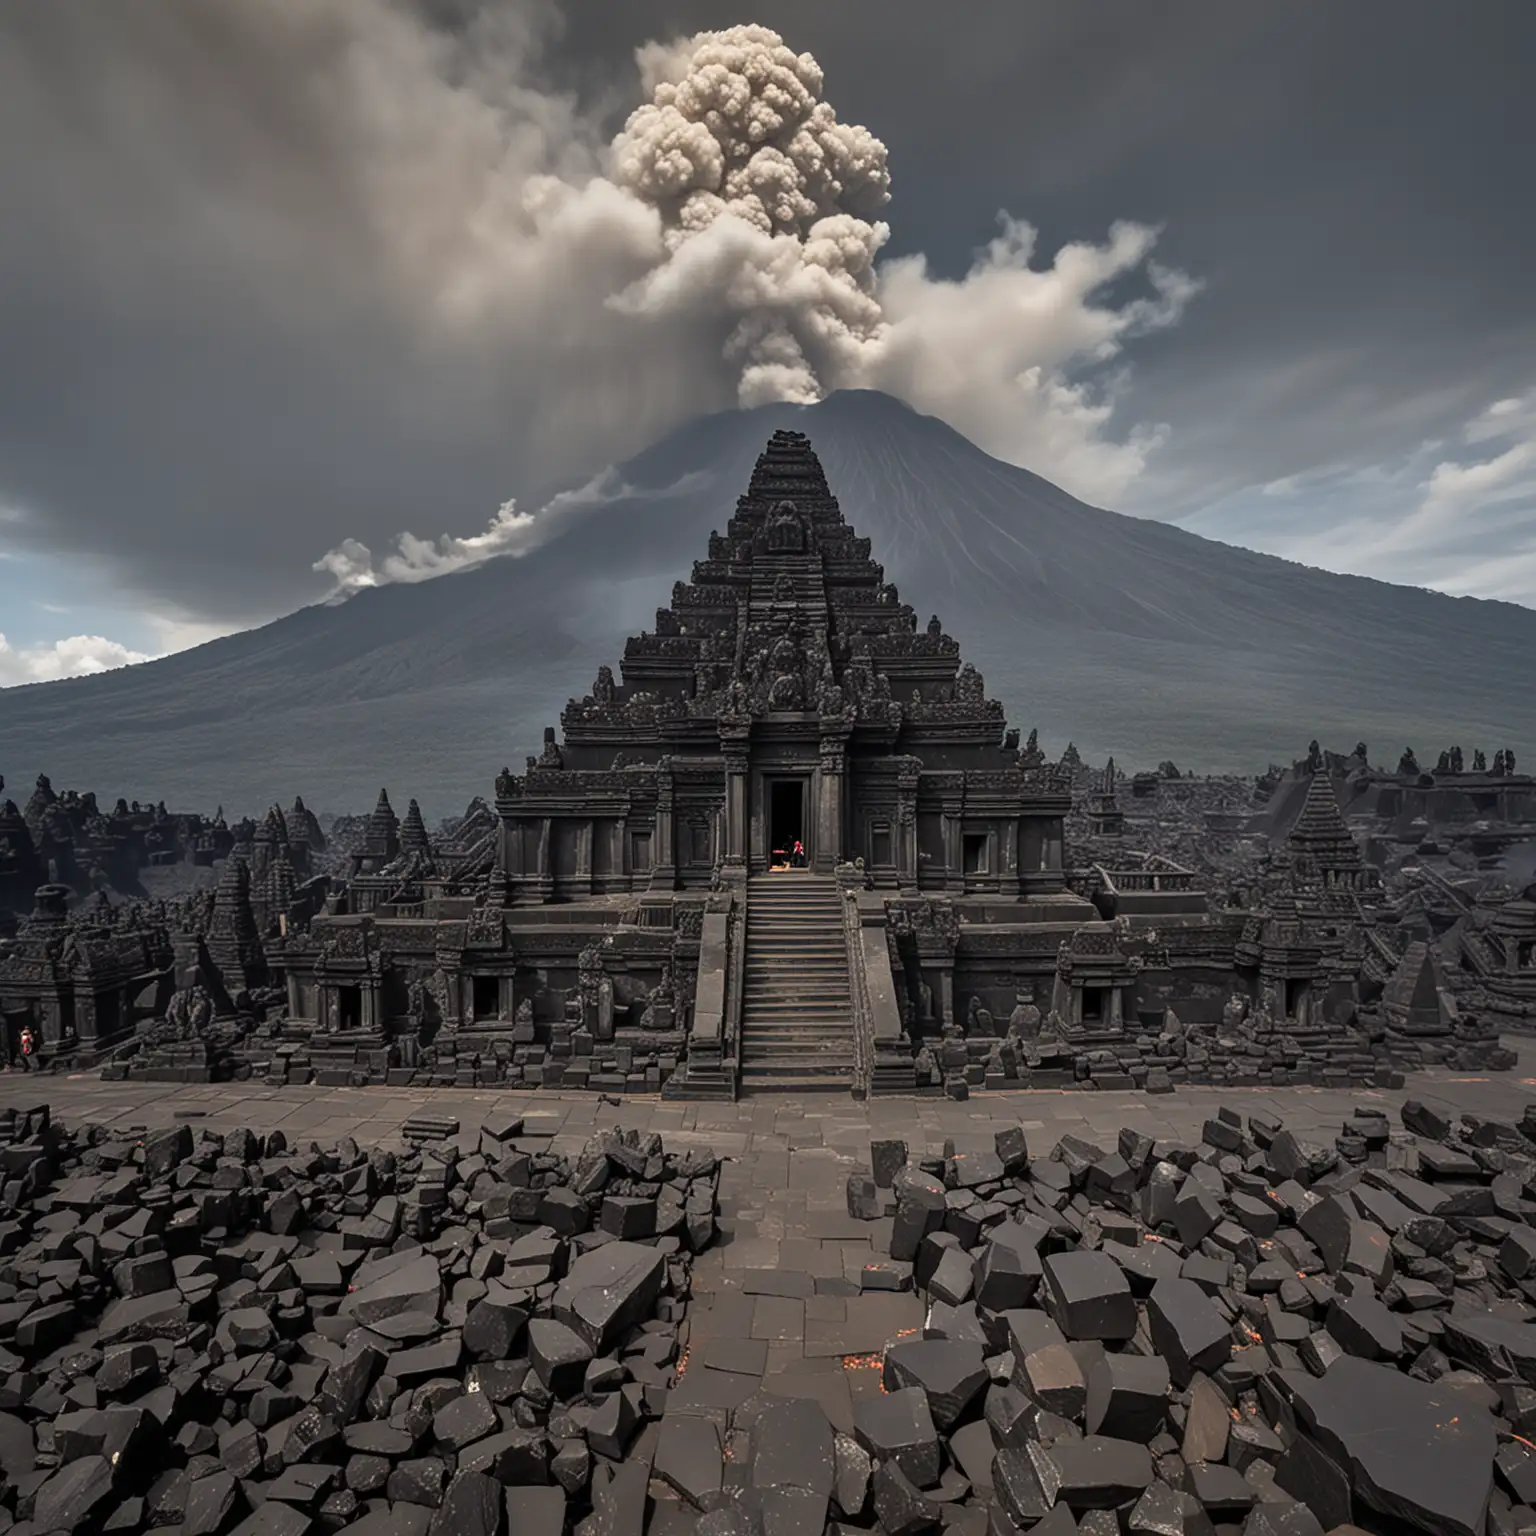 a view of a very large ancient Indonesian black stone temple at the top of an erupting volcano seen above